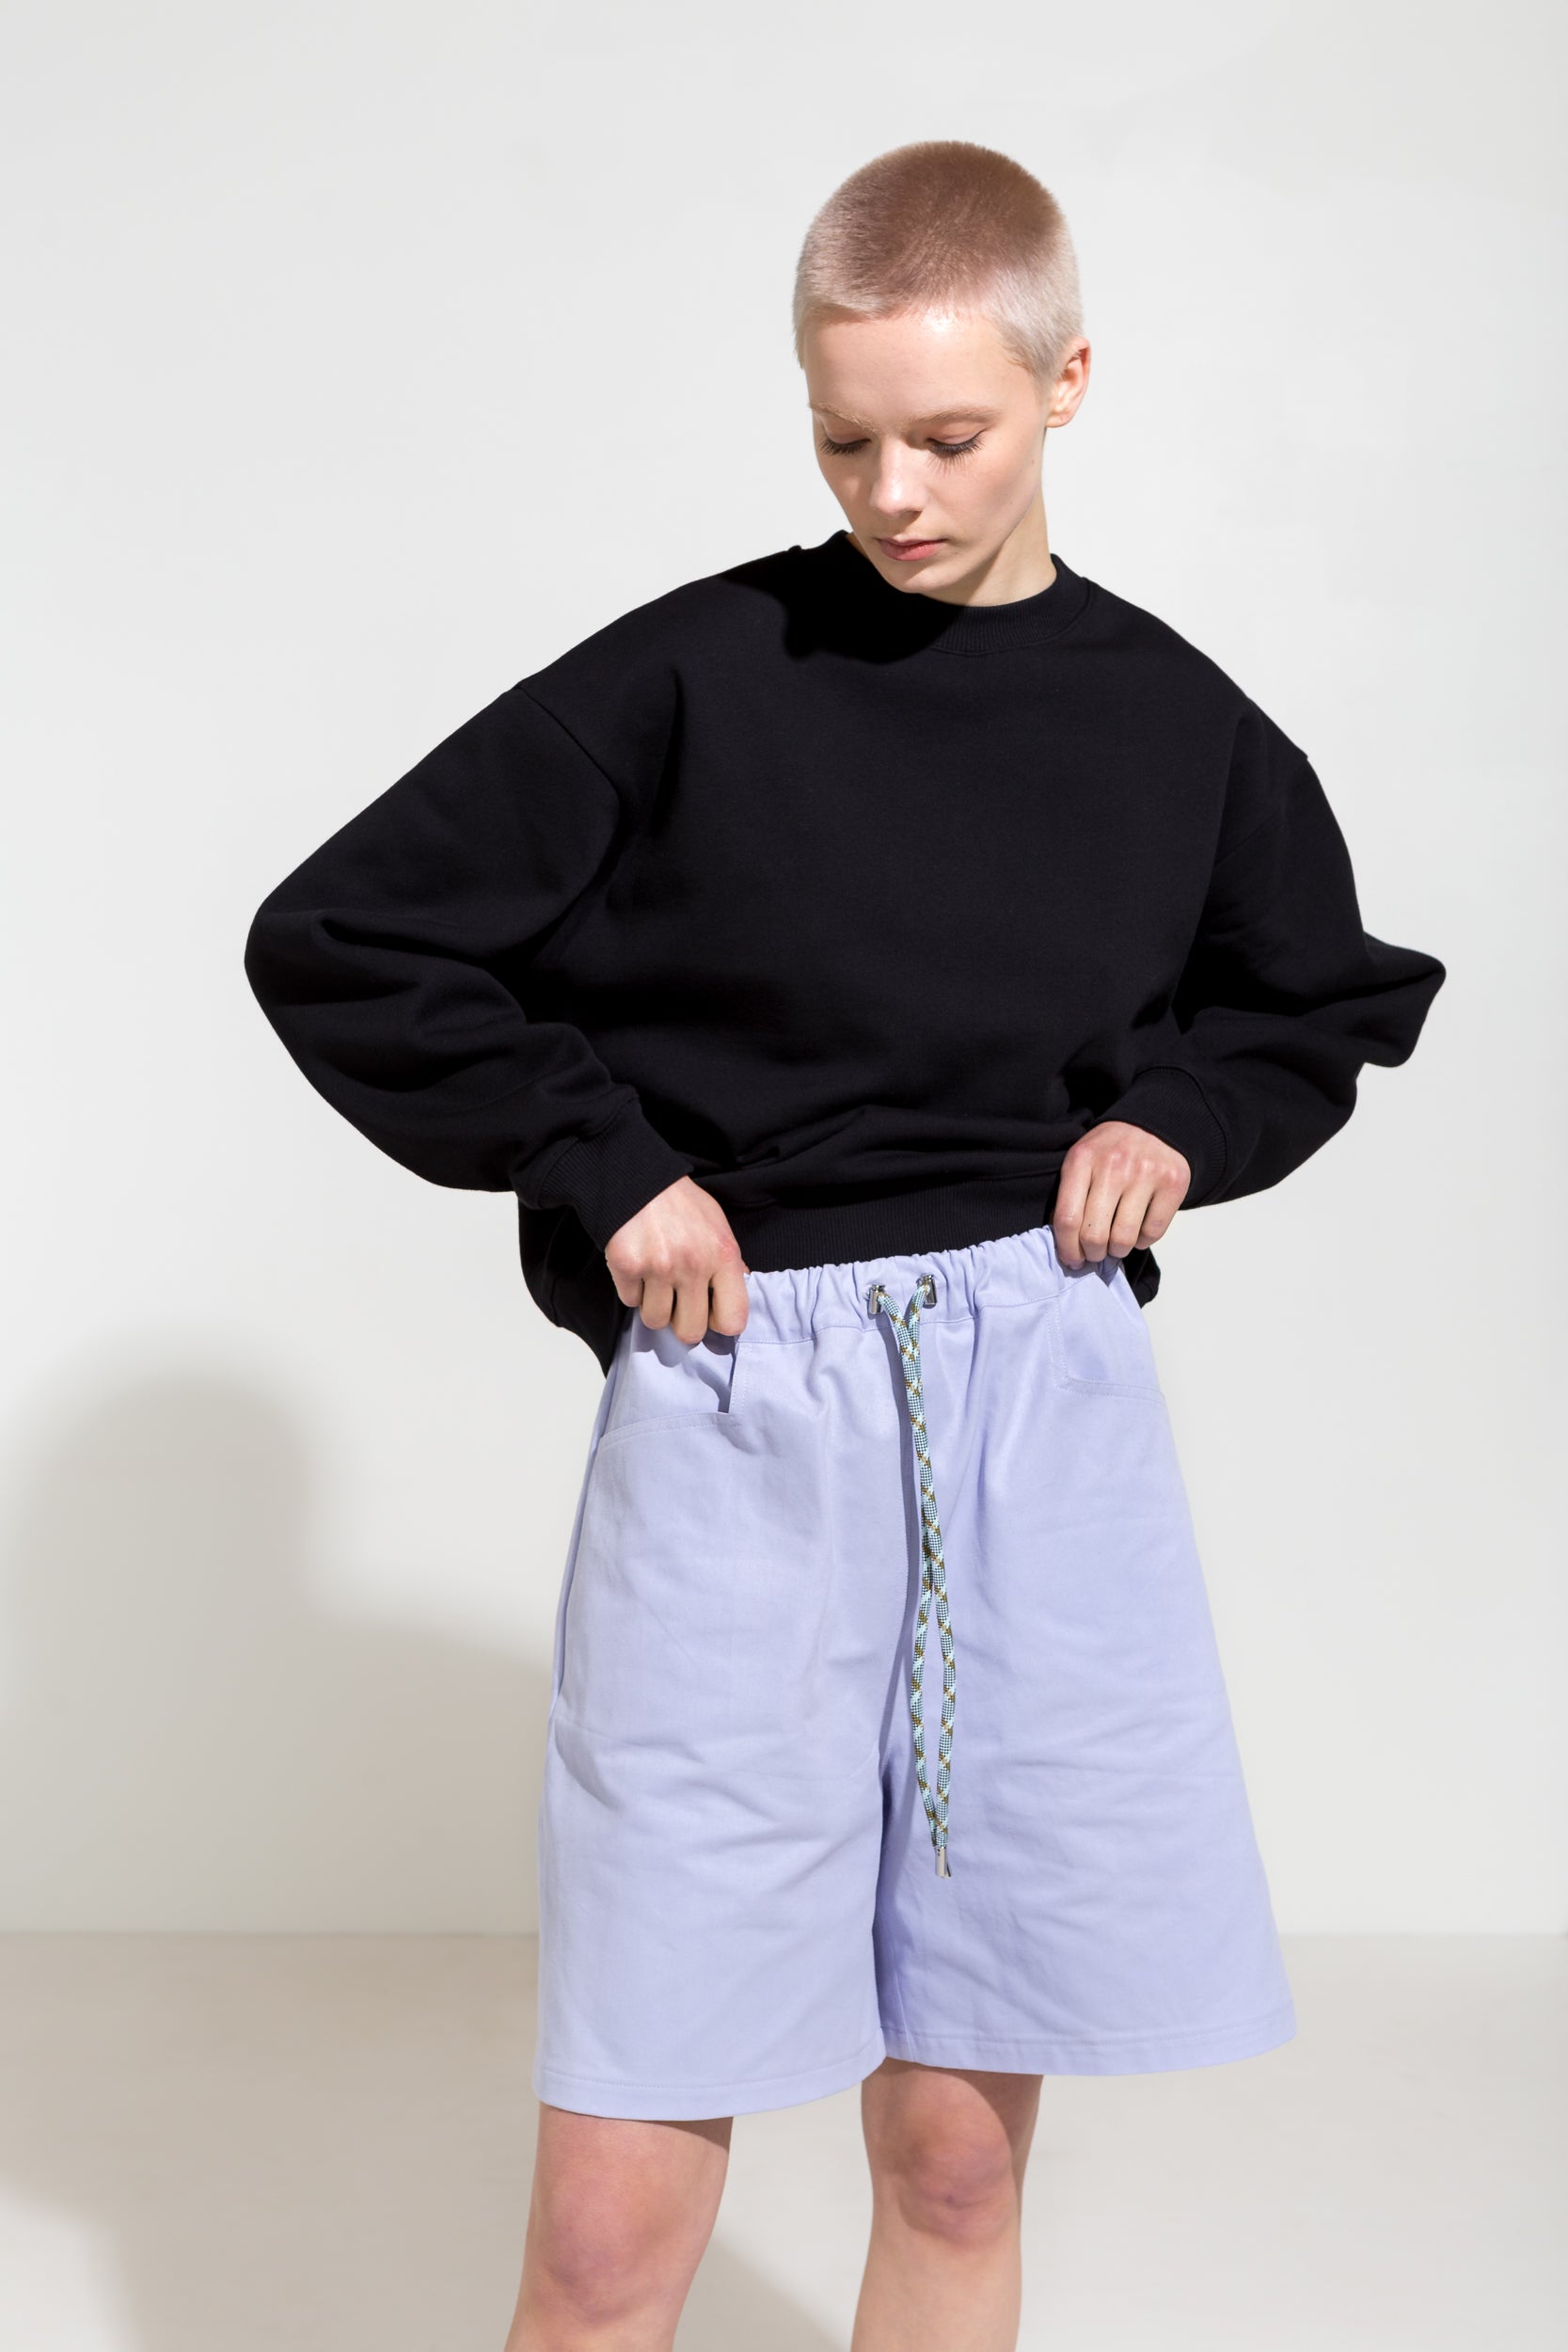 Relaxed fit twill shorts and black organic sweatshirt